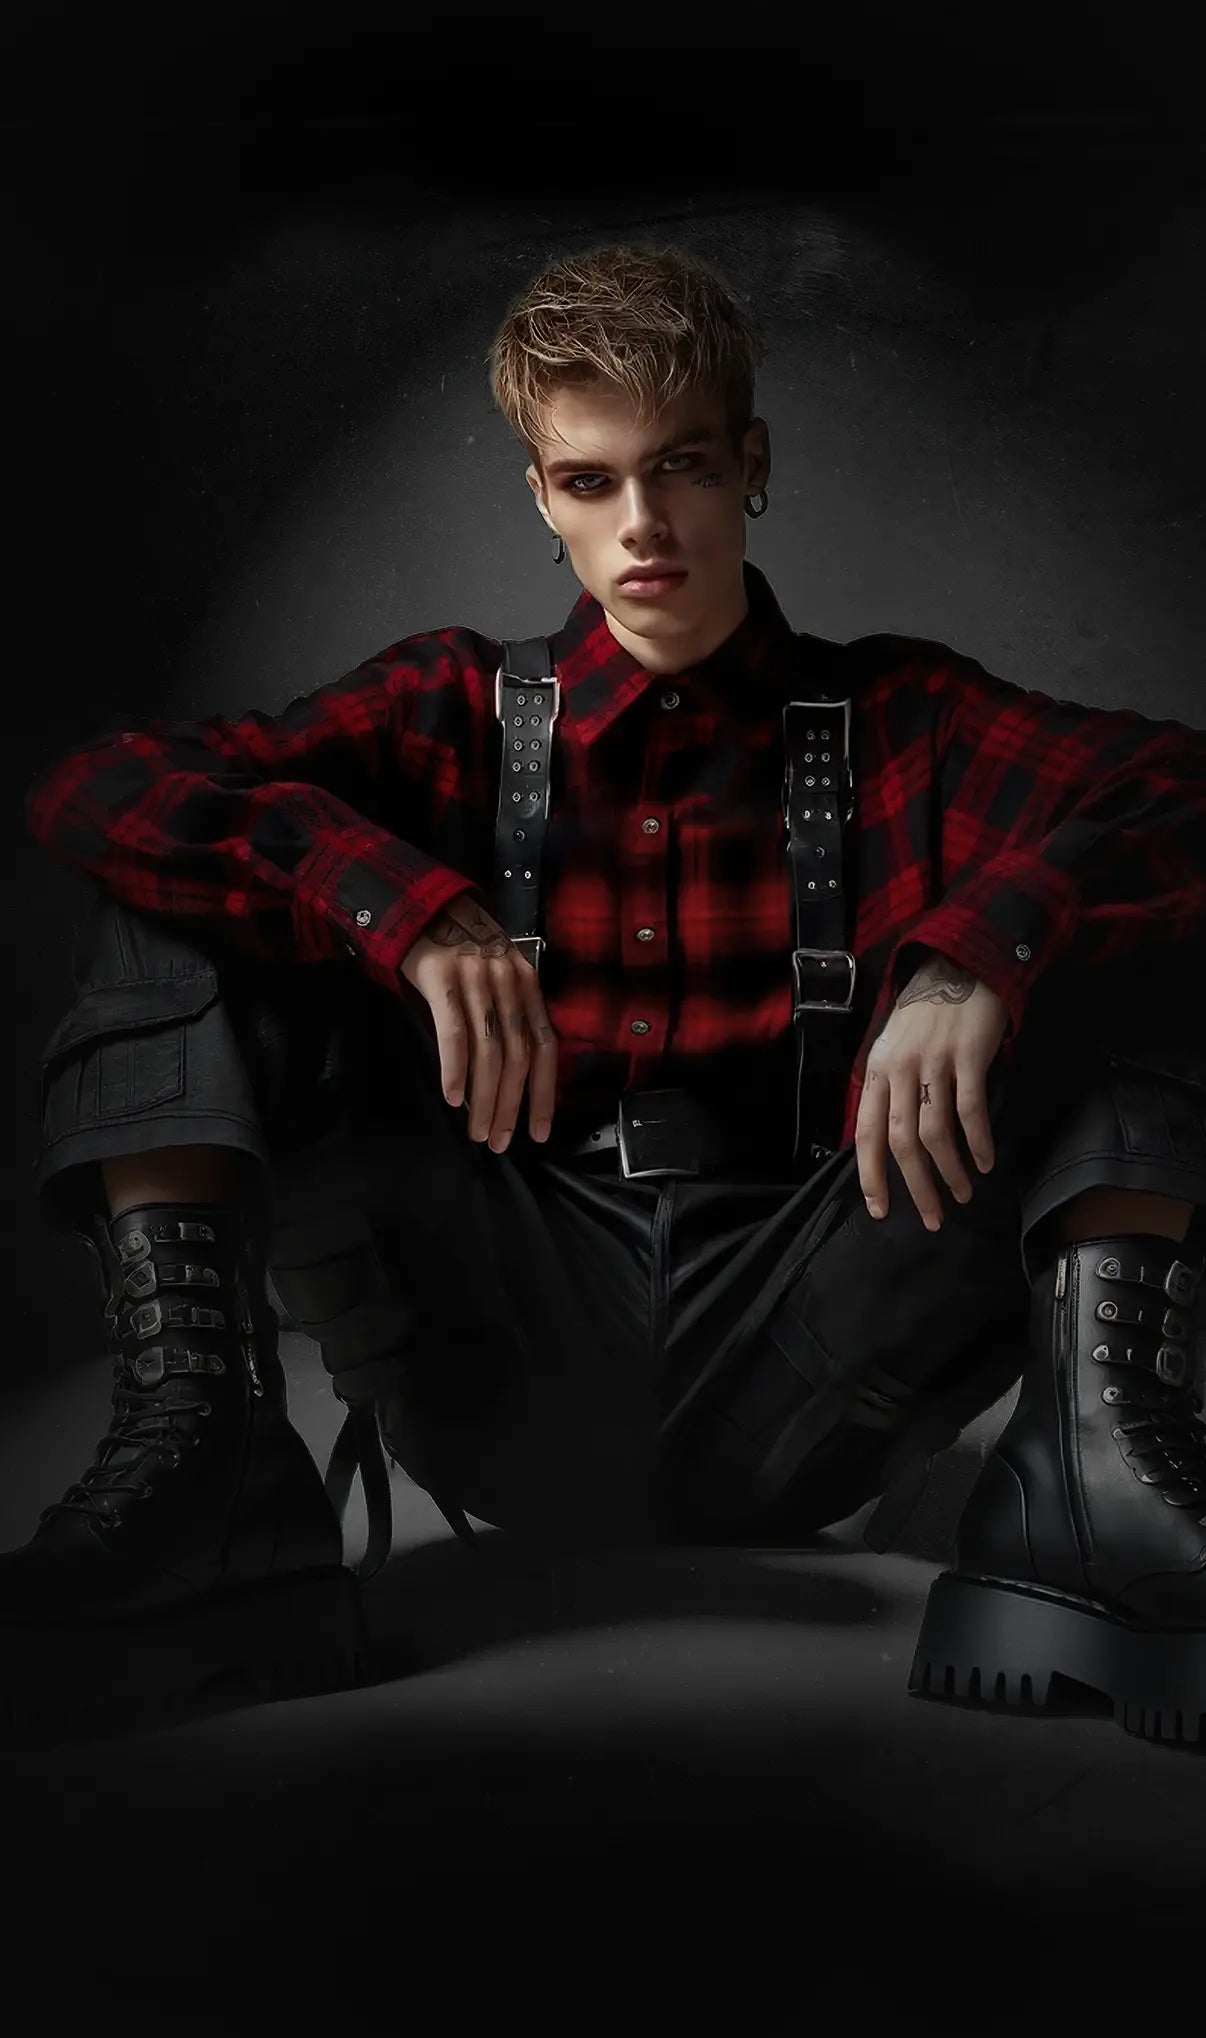 Sitting Punk Style Man in Red Plaid Shirt and Black Boots